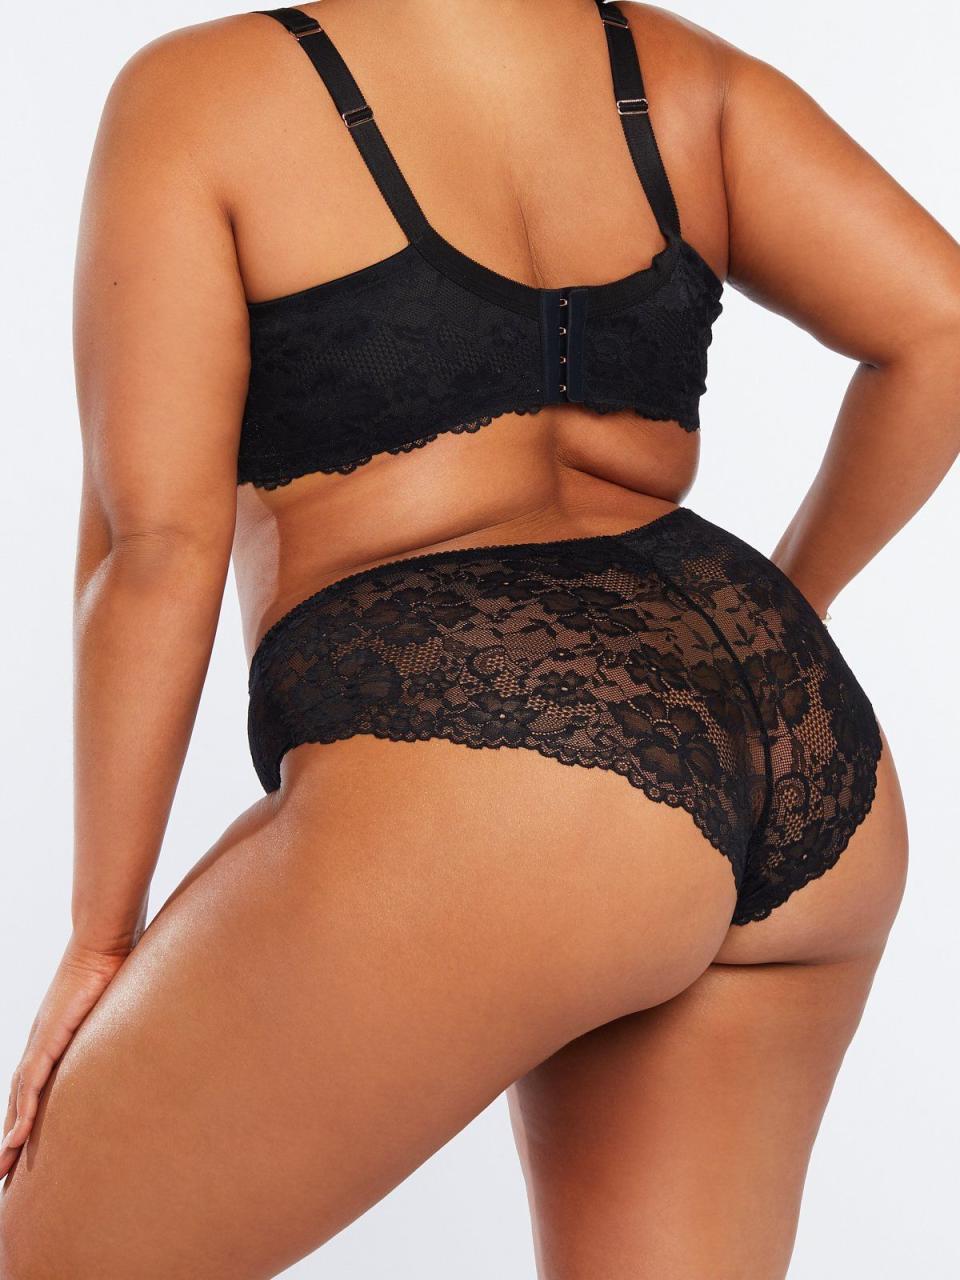 47) Savage x Fenty Floral Lace Cheeky